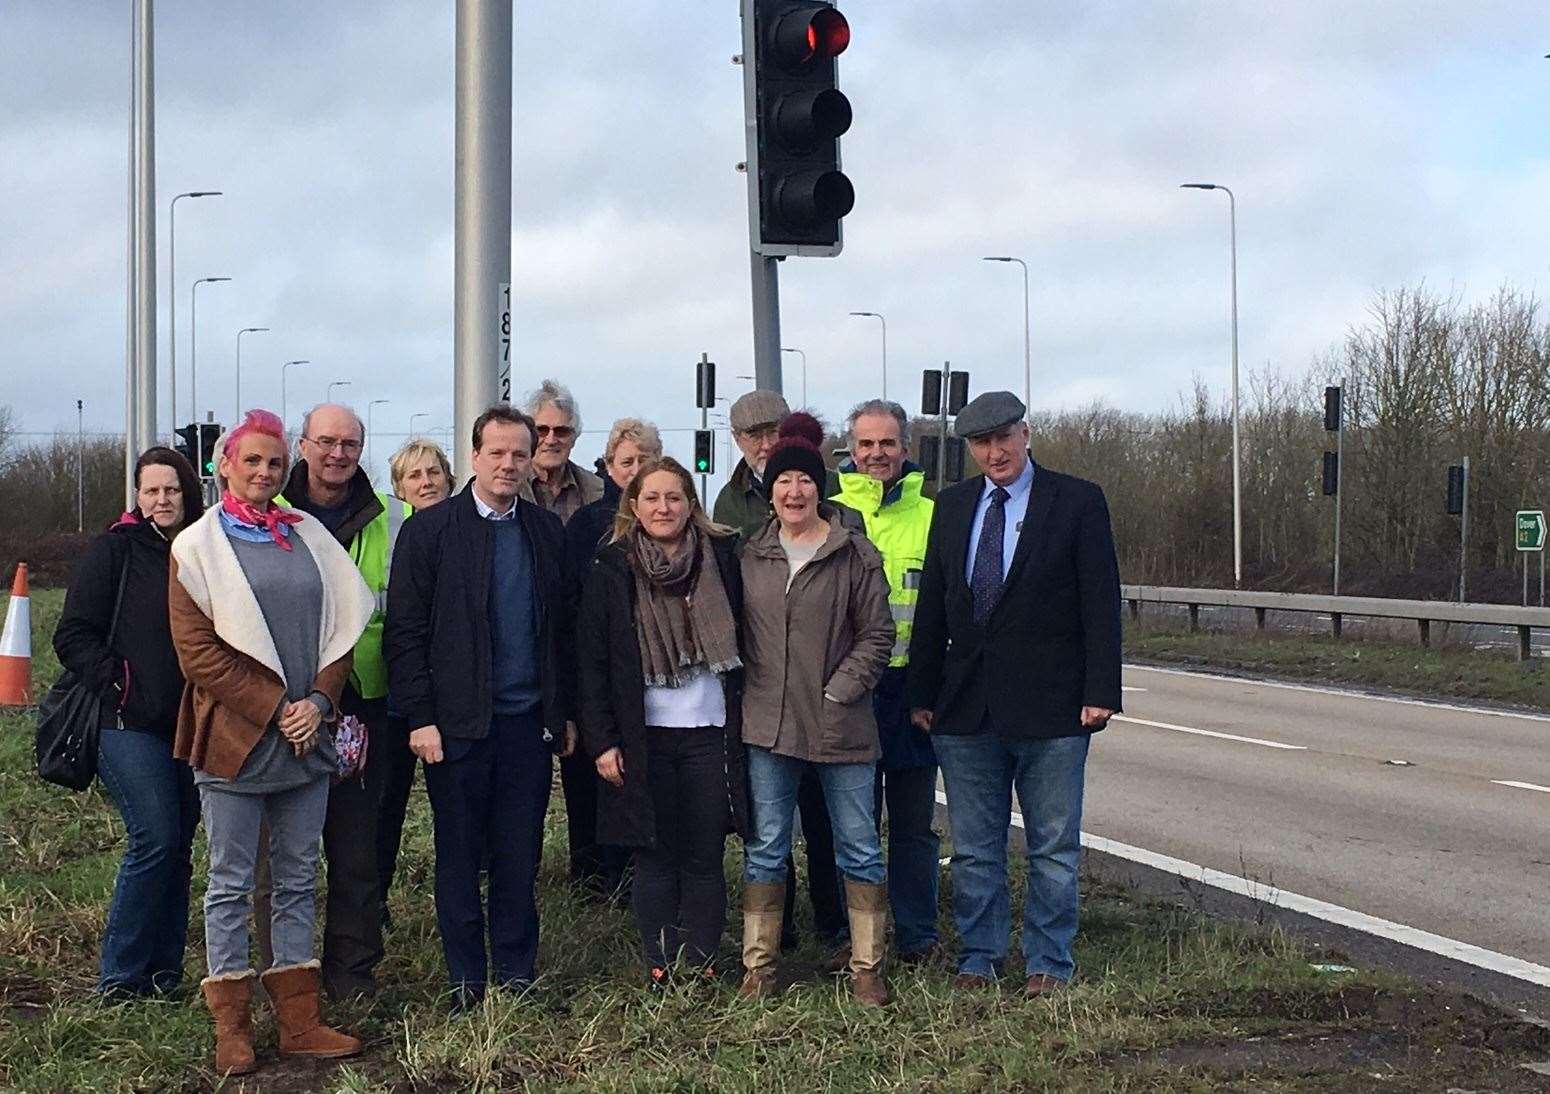 Charlie Elphicke at the A2 roadside with residents of Lydden and nearby Shepherdswell. Picture: the office of Charlie Elphicke MP